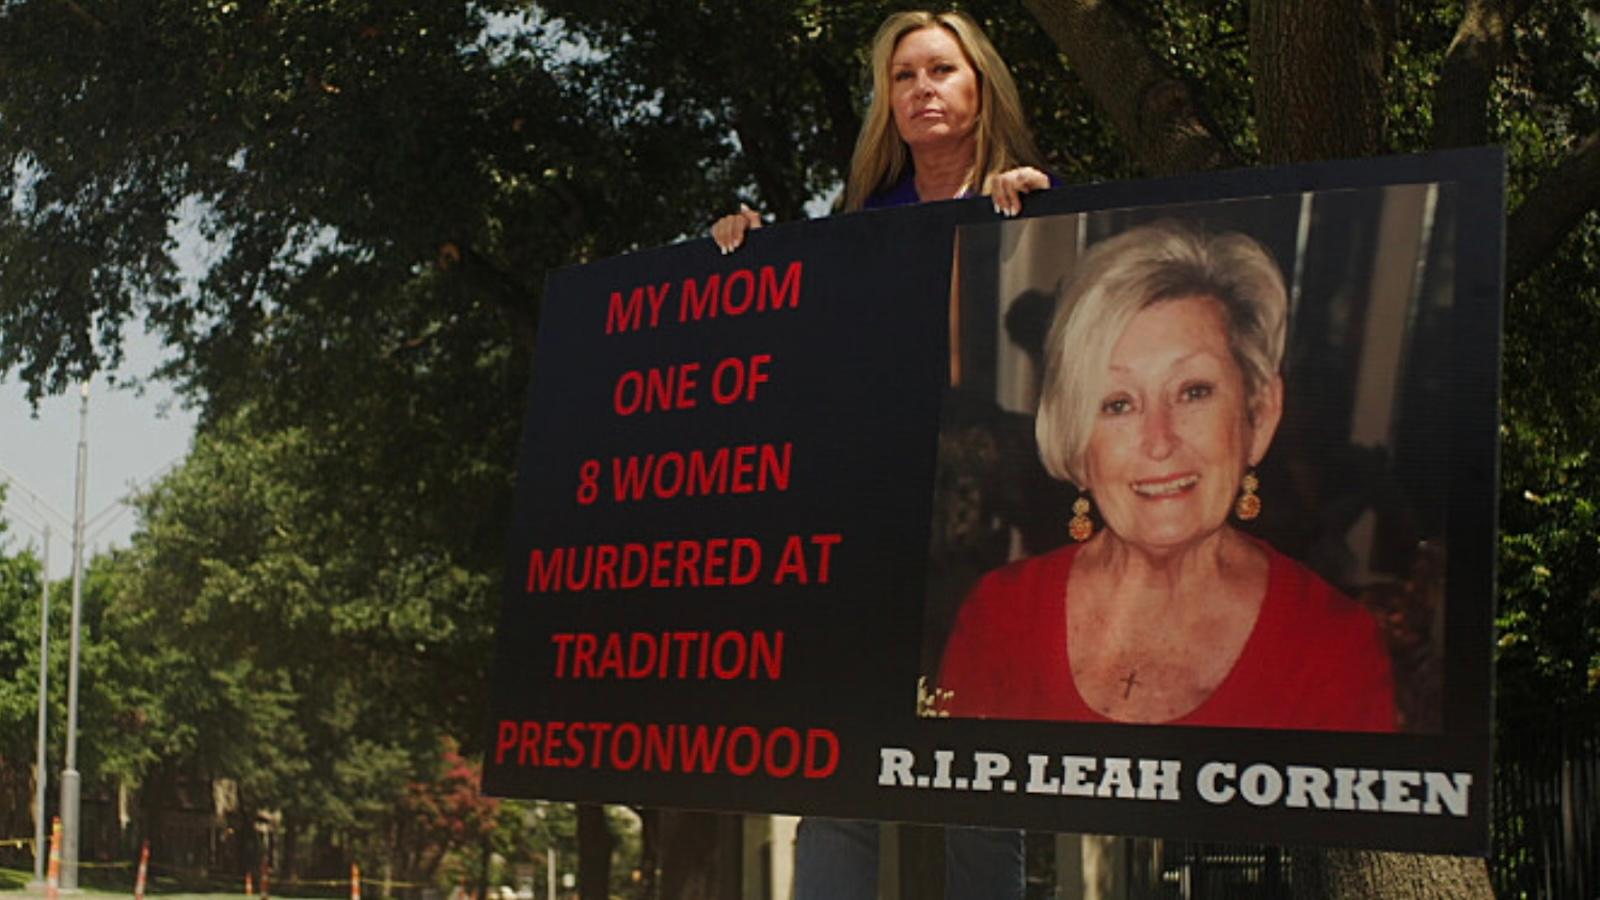 MJ Jennings, daughter of victim Leah Corken, holding a sign outside the Tradition Prestonwood facility in Pillowcase Murders